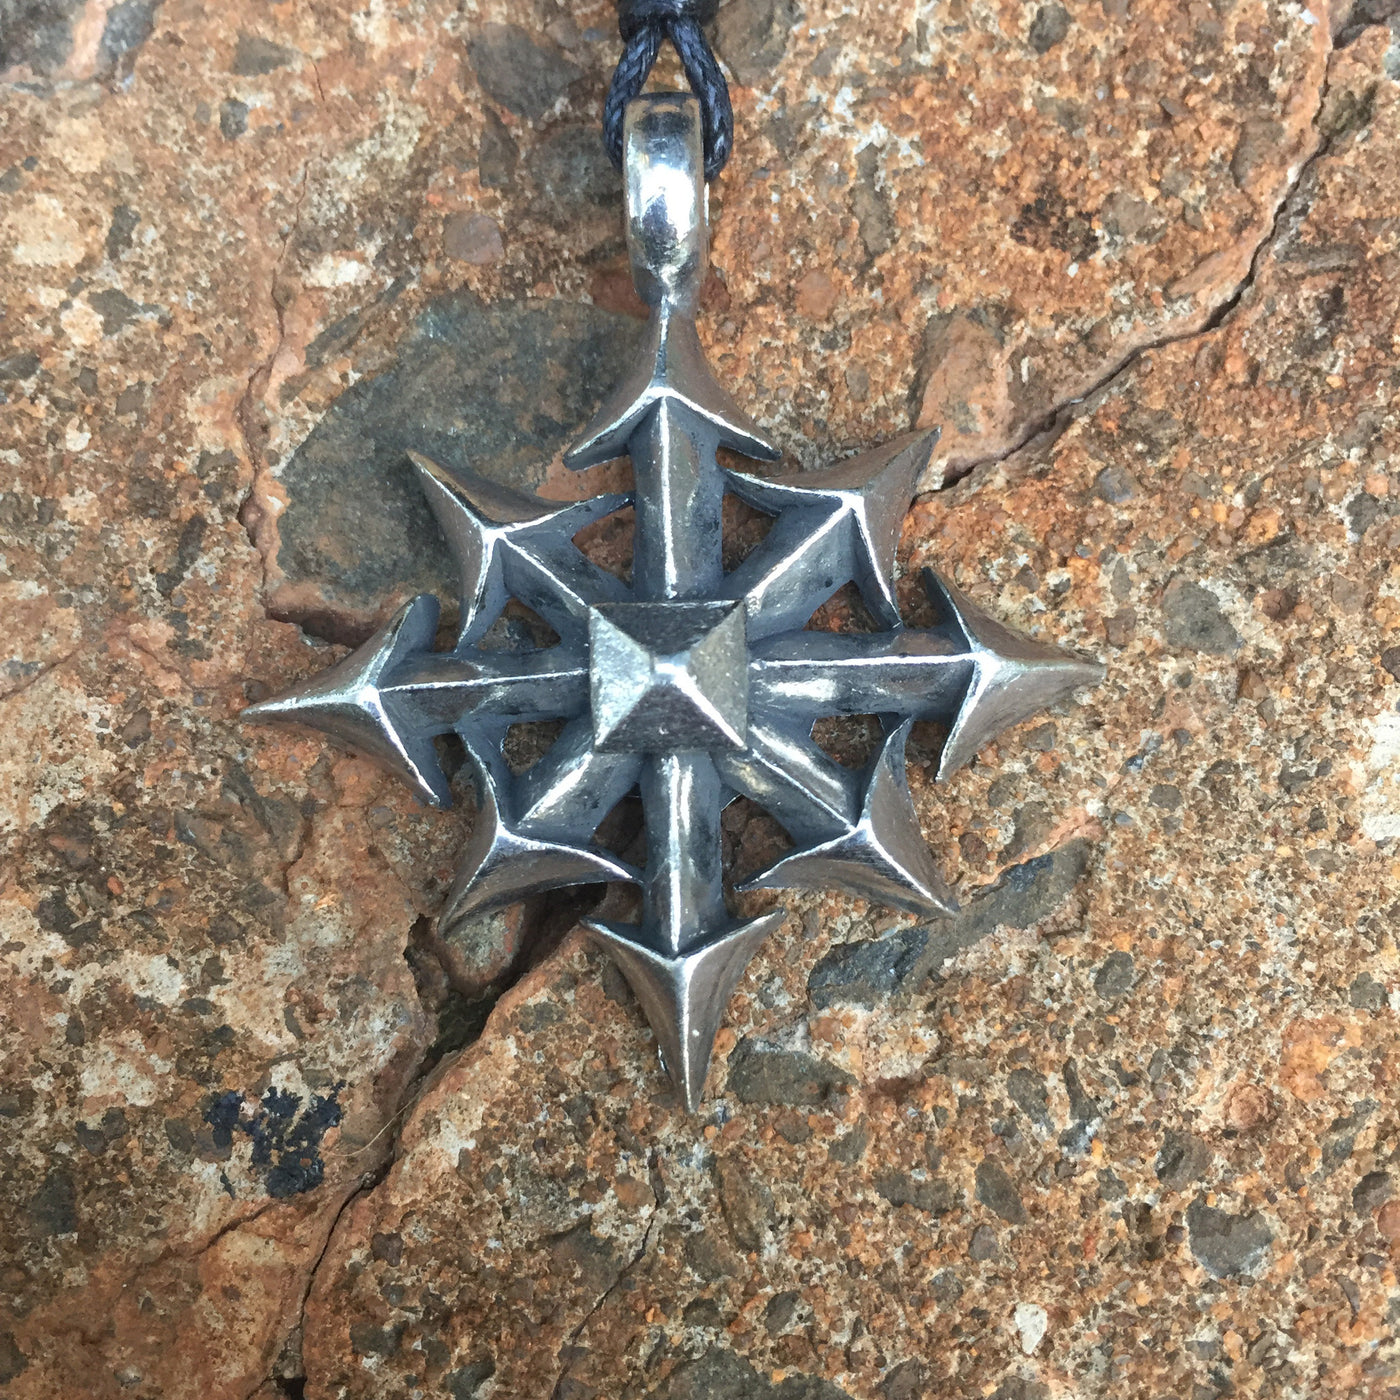 Chaos star keychain and necklace